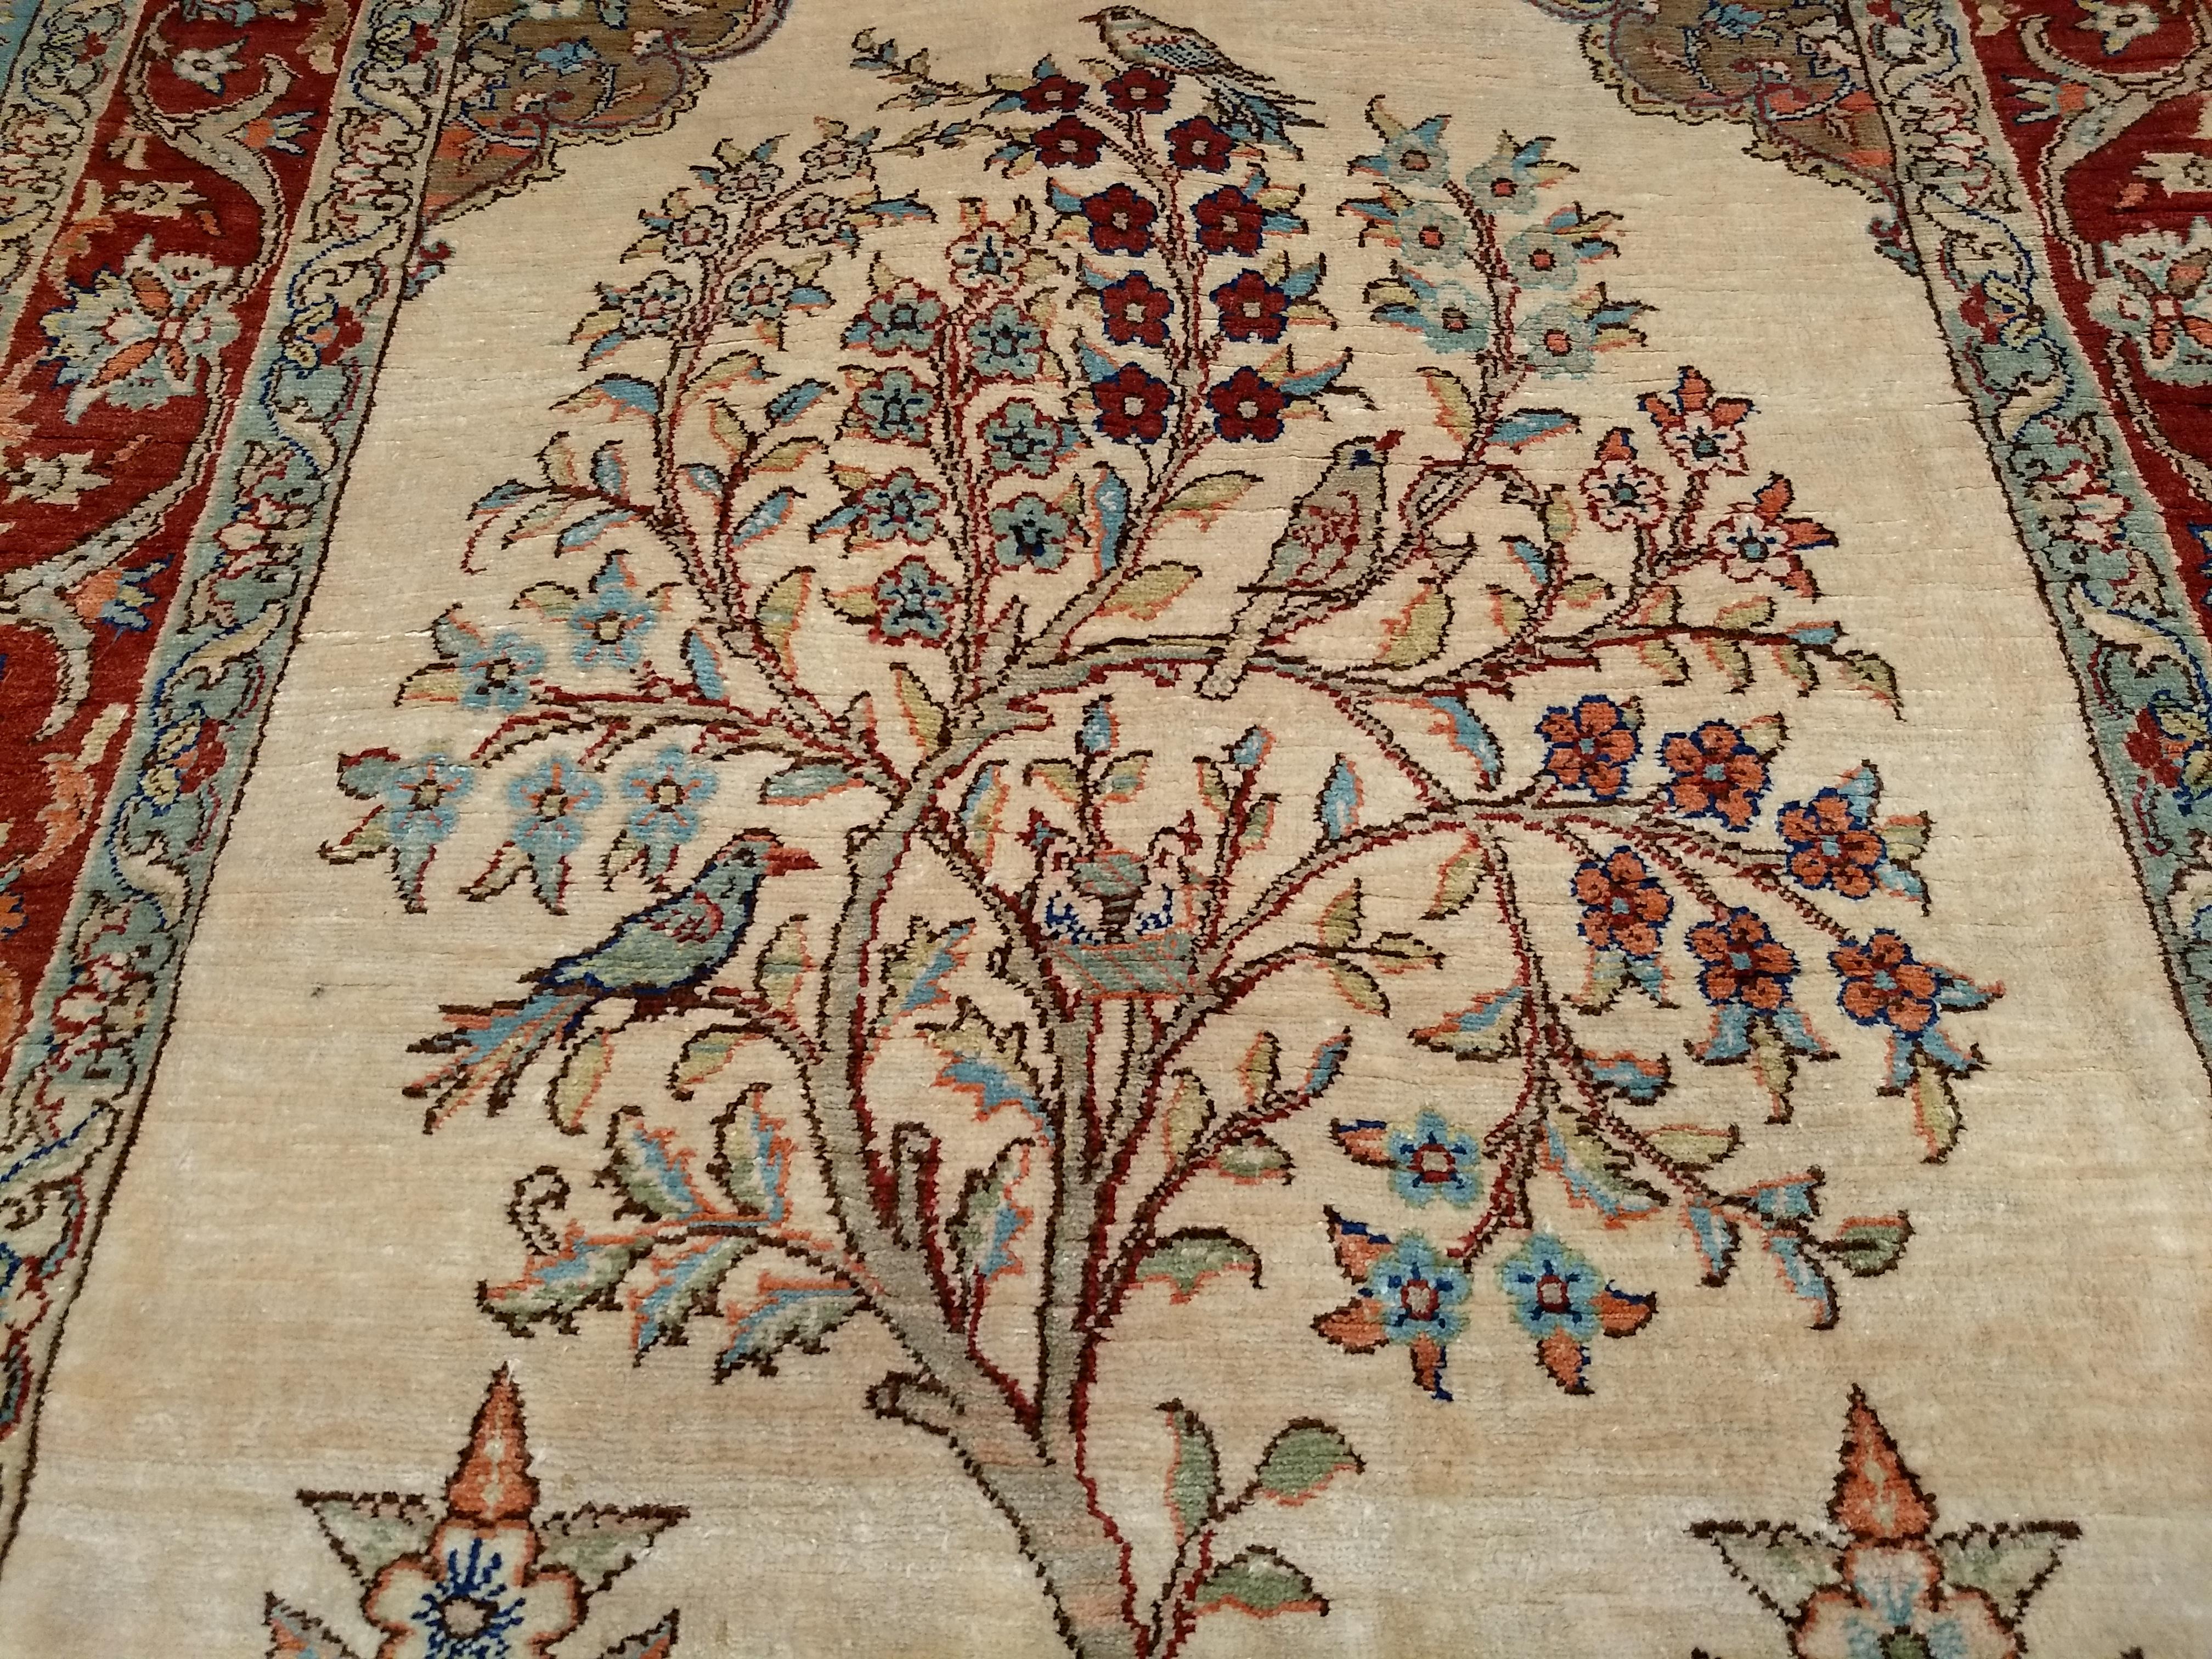 Turkish Silk Kayseri Area Rug in Tree of Life Pattern in Ivory, Burgundy, Blue In Excellent Condition For Sale In Barrington, IL